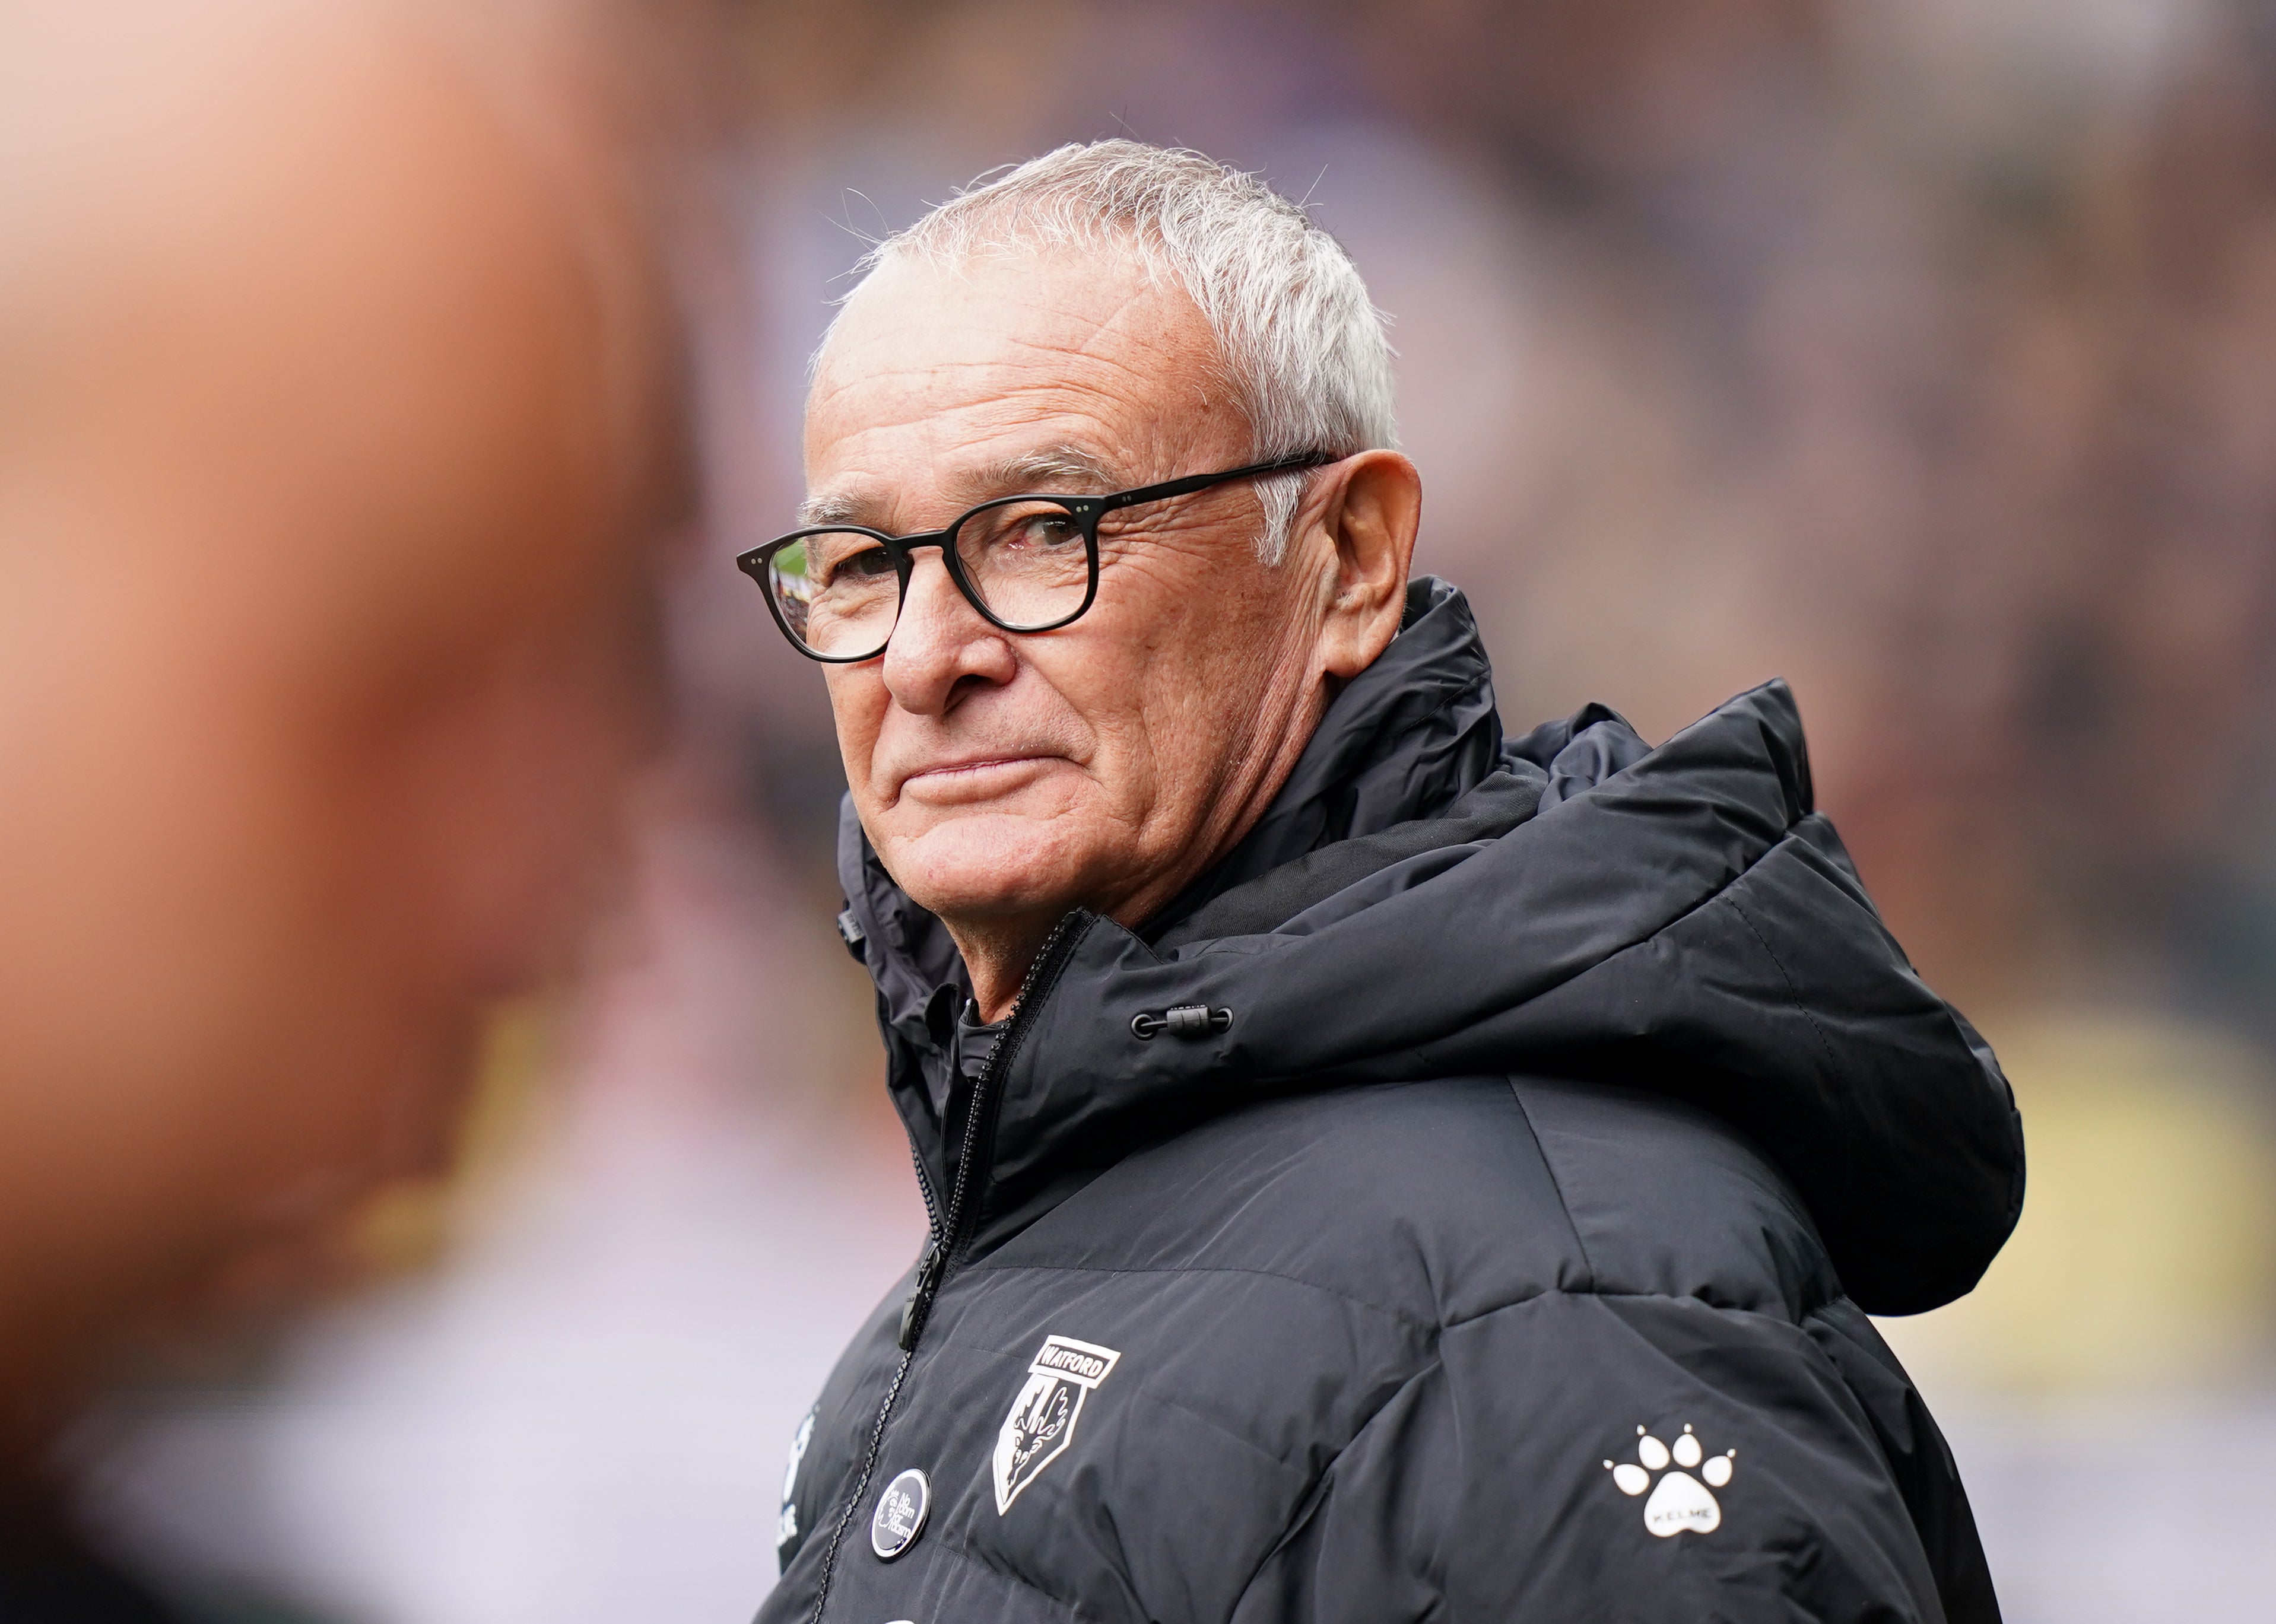 Watford manager Claudio Ranieri feels the club’s Covid-19 protocols are robust (Tess Derry/PA)